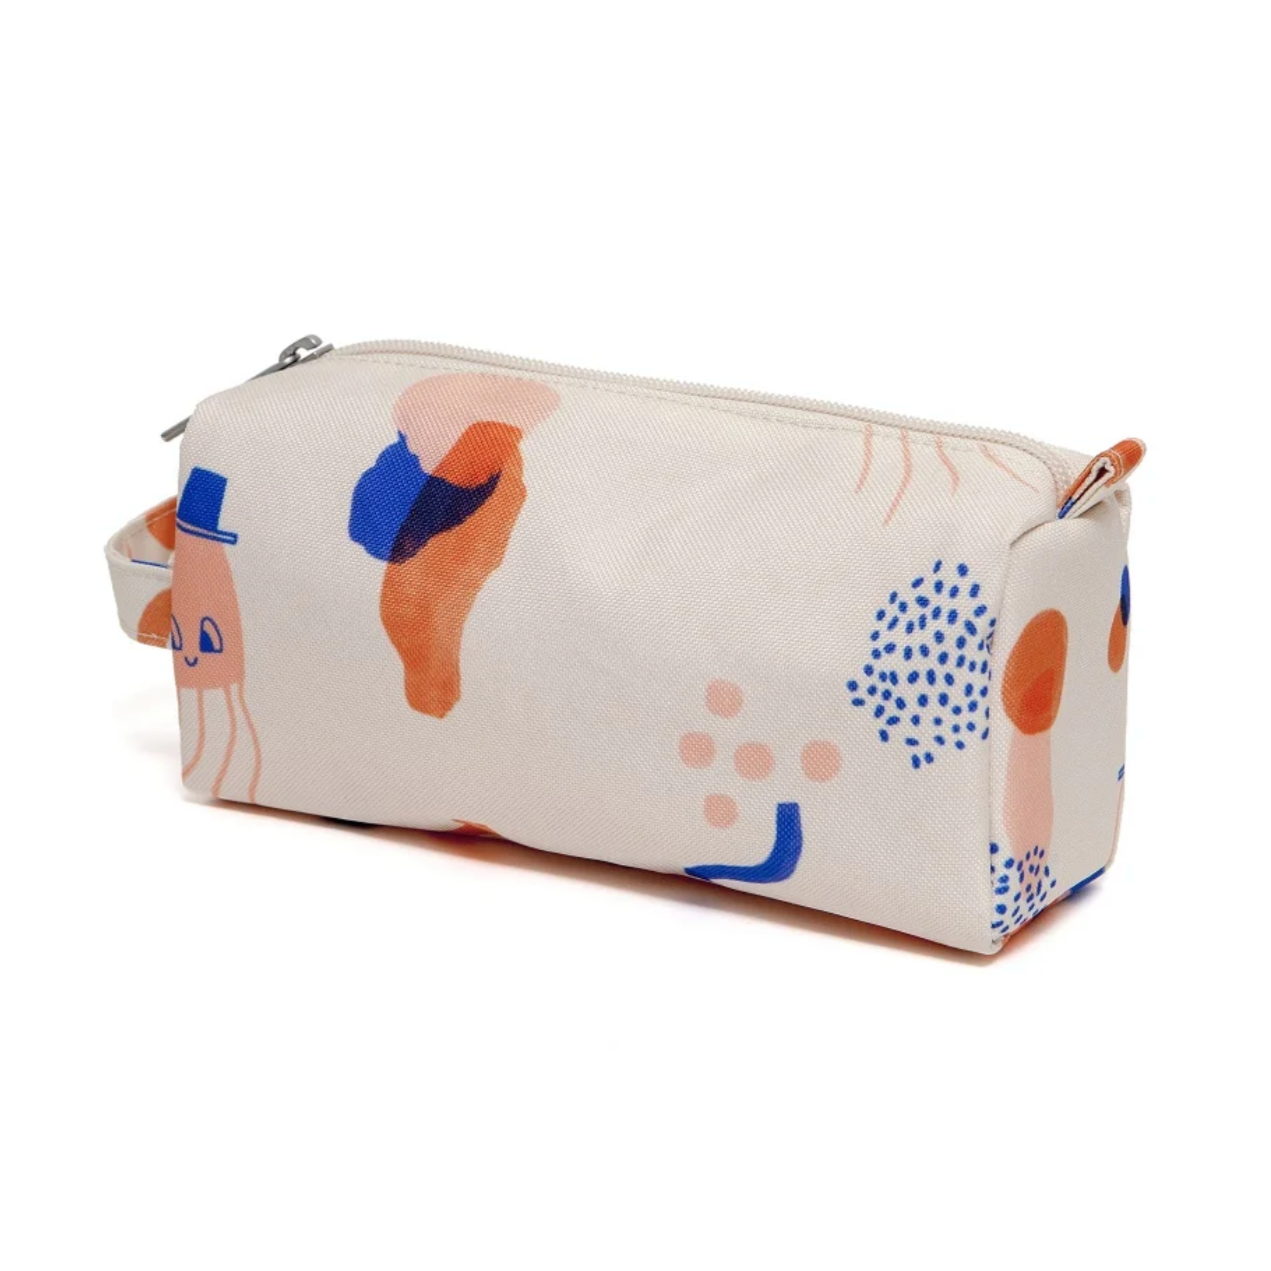 Pencil Case or Toiletry Bag -jelly